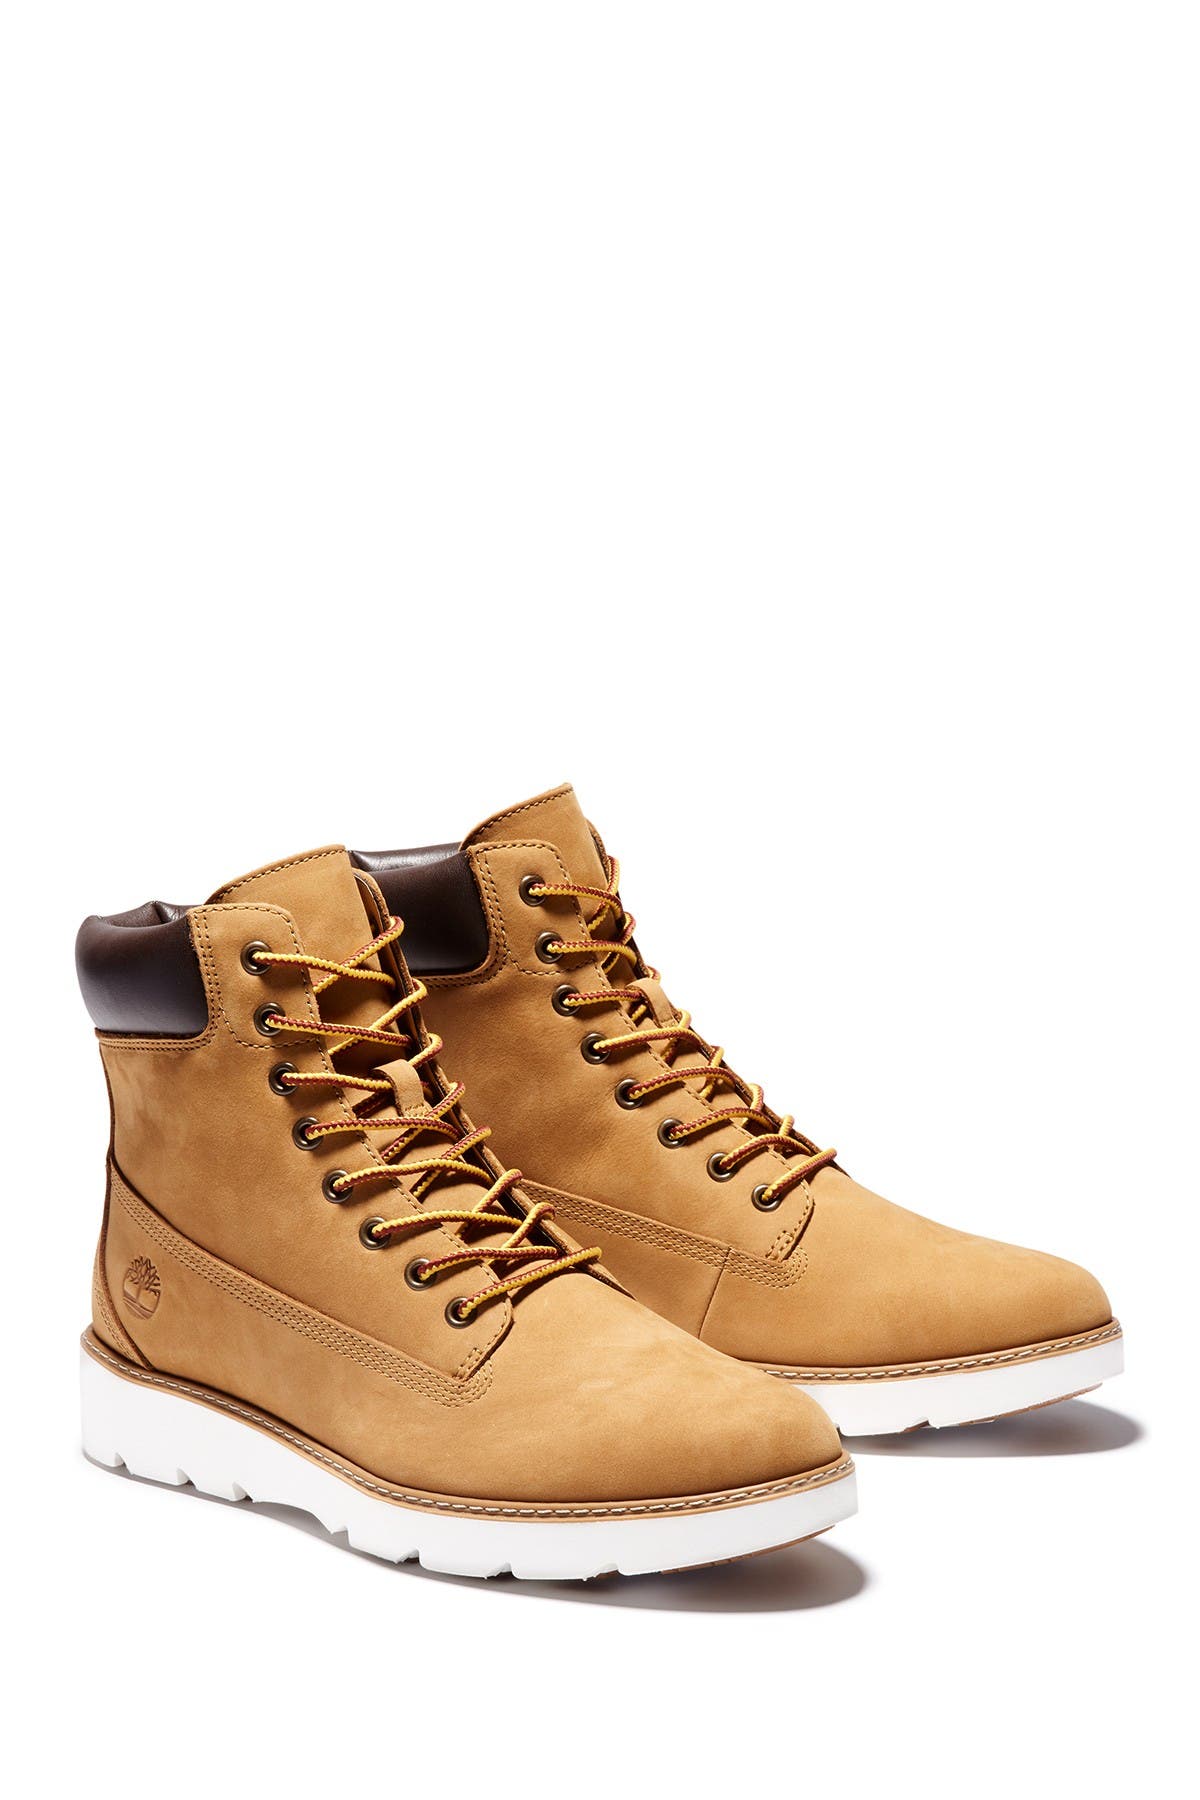 Timberland | Keeley Field Boot 